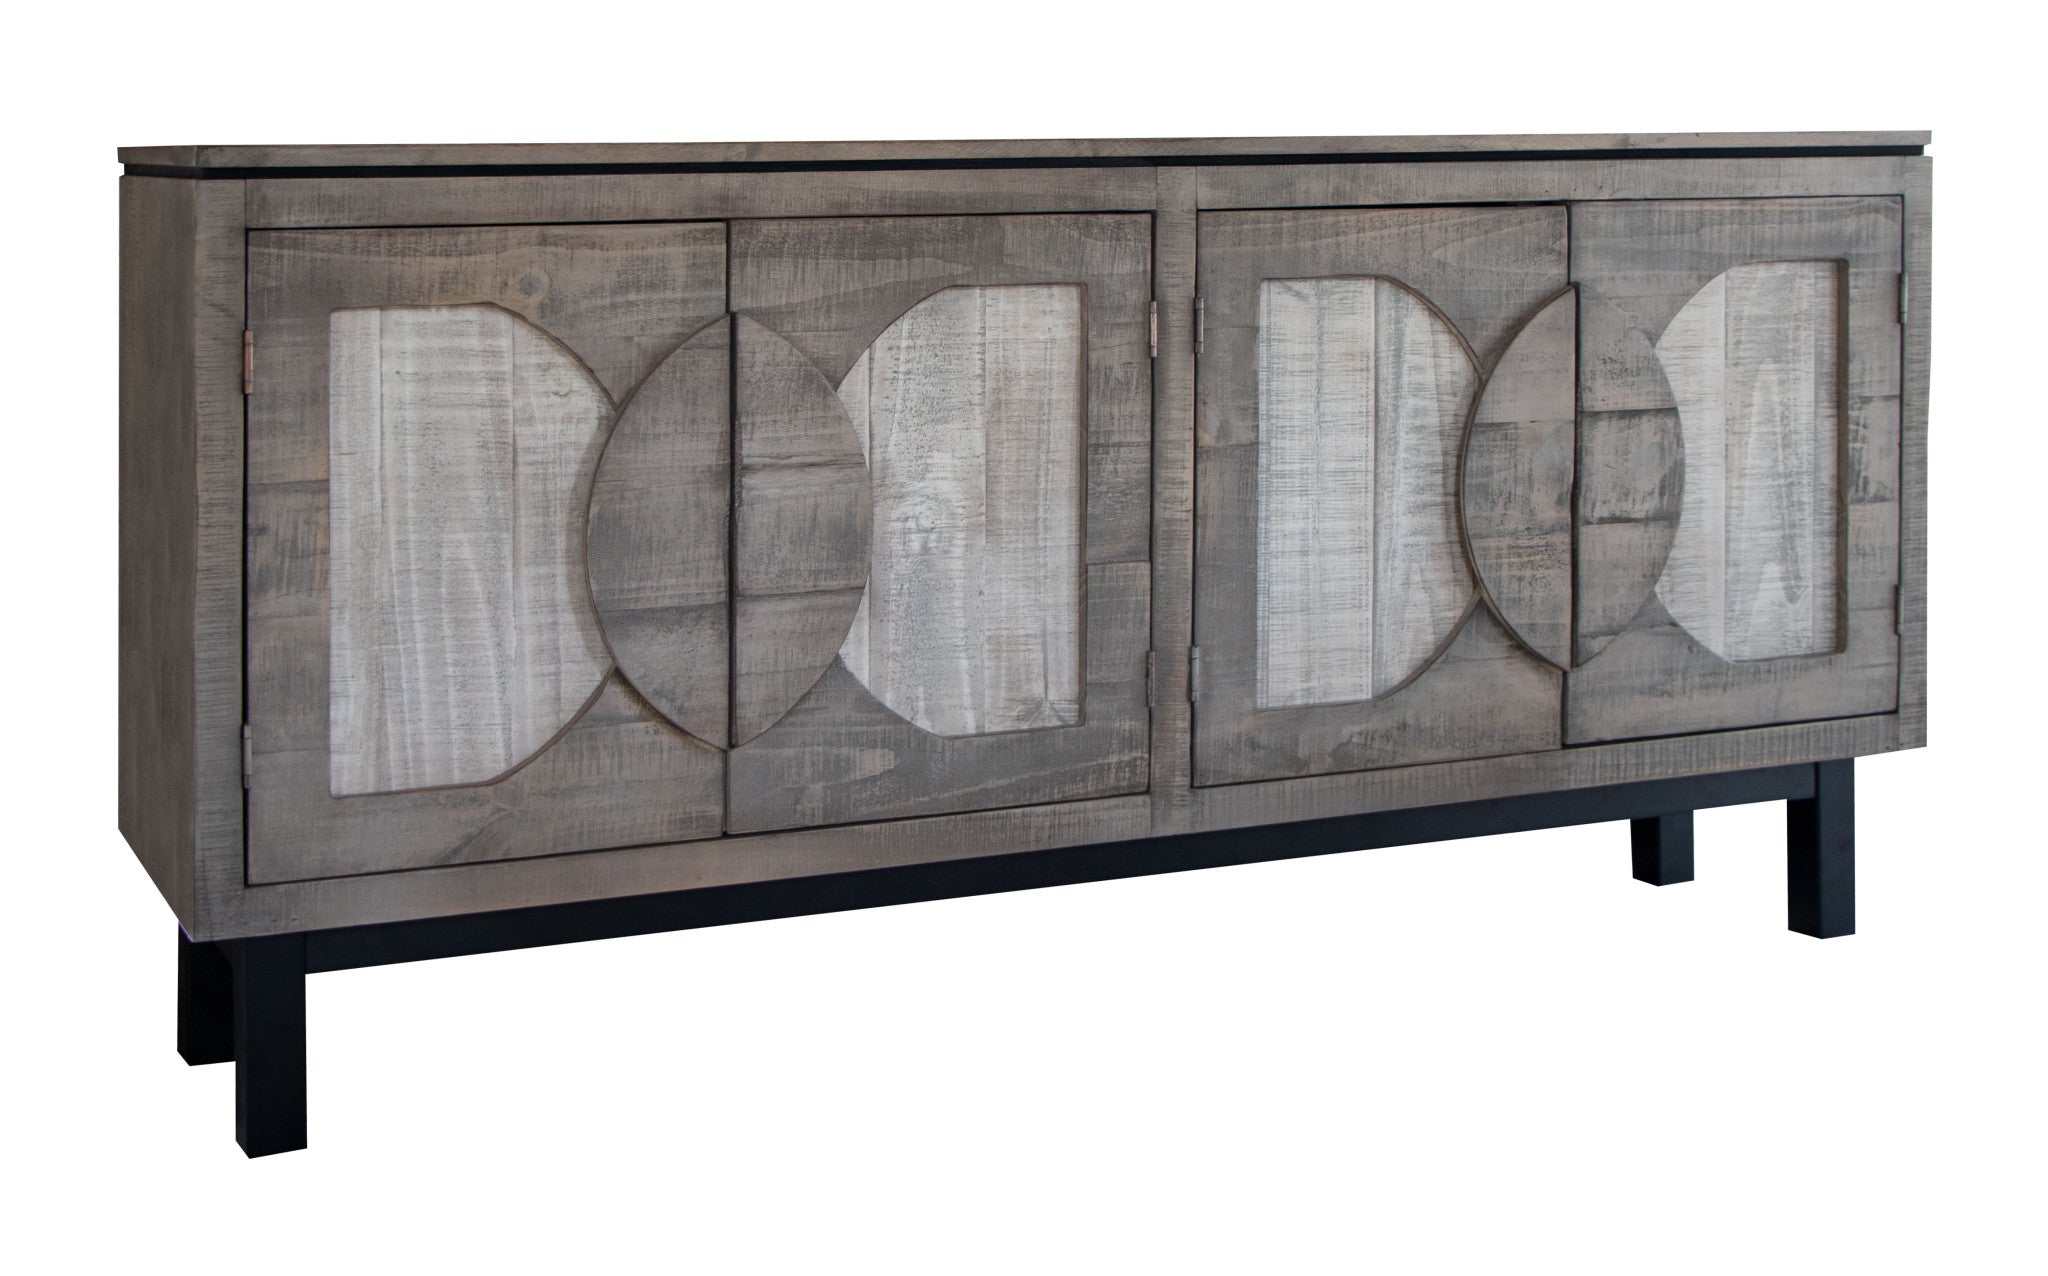 69" Gray Solid and Manufactured Wood Distressed Credenza